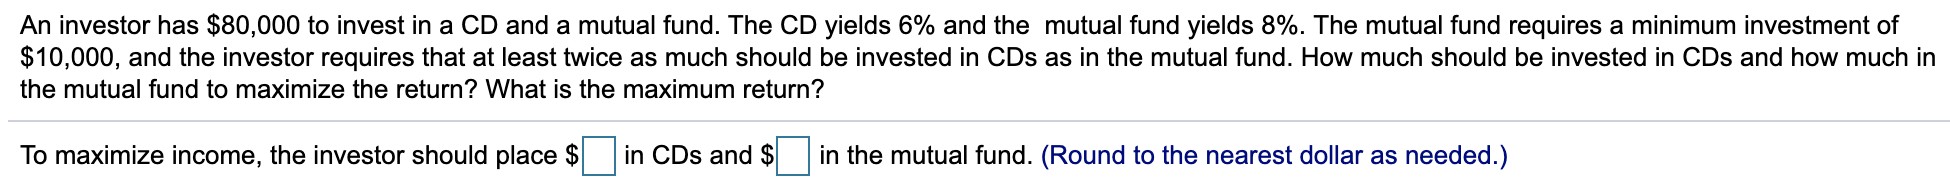 An investor has $80,000 to invest in a CD and a mutual fund. The CD yields 6% and the mutual fund yields 8%. The mutual fund requires a minimum investment of
$10,000, and the investor requires that at least twice as much should be invested in CDs as in the mutual fund. How much should be invested in CDs and how much in
the mutual fund to maximize the return? What is the maximum return?
in CDs and $
To maximize income, the investor should place $
in the mutual fund. (Round to the nearest dollar as needed.)
